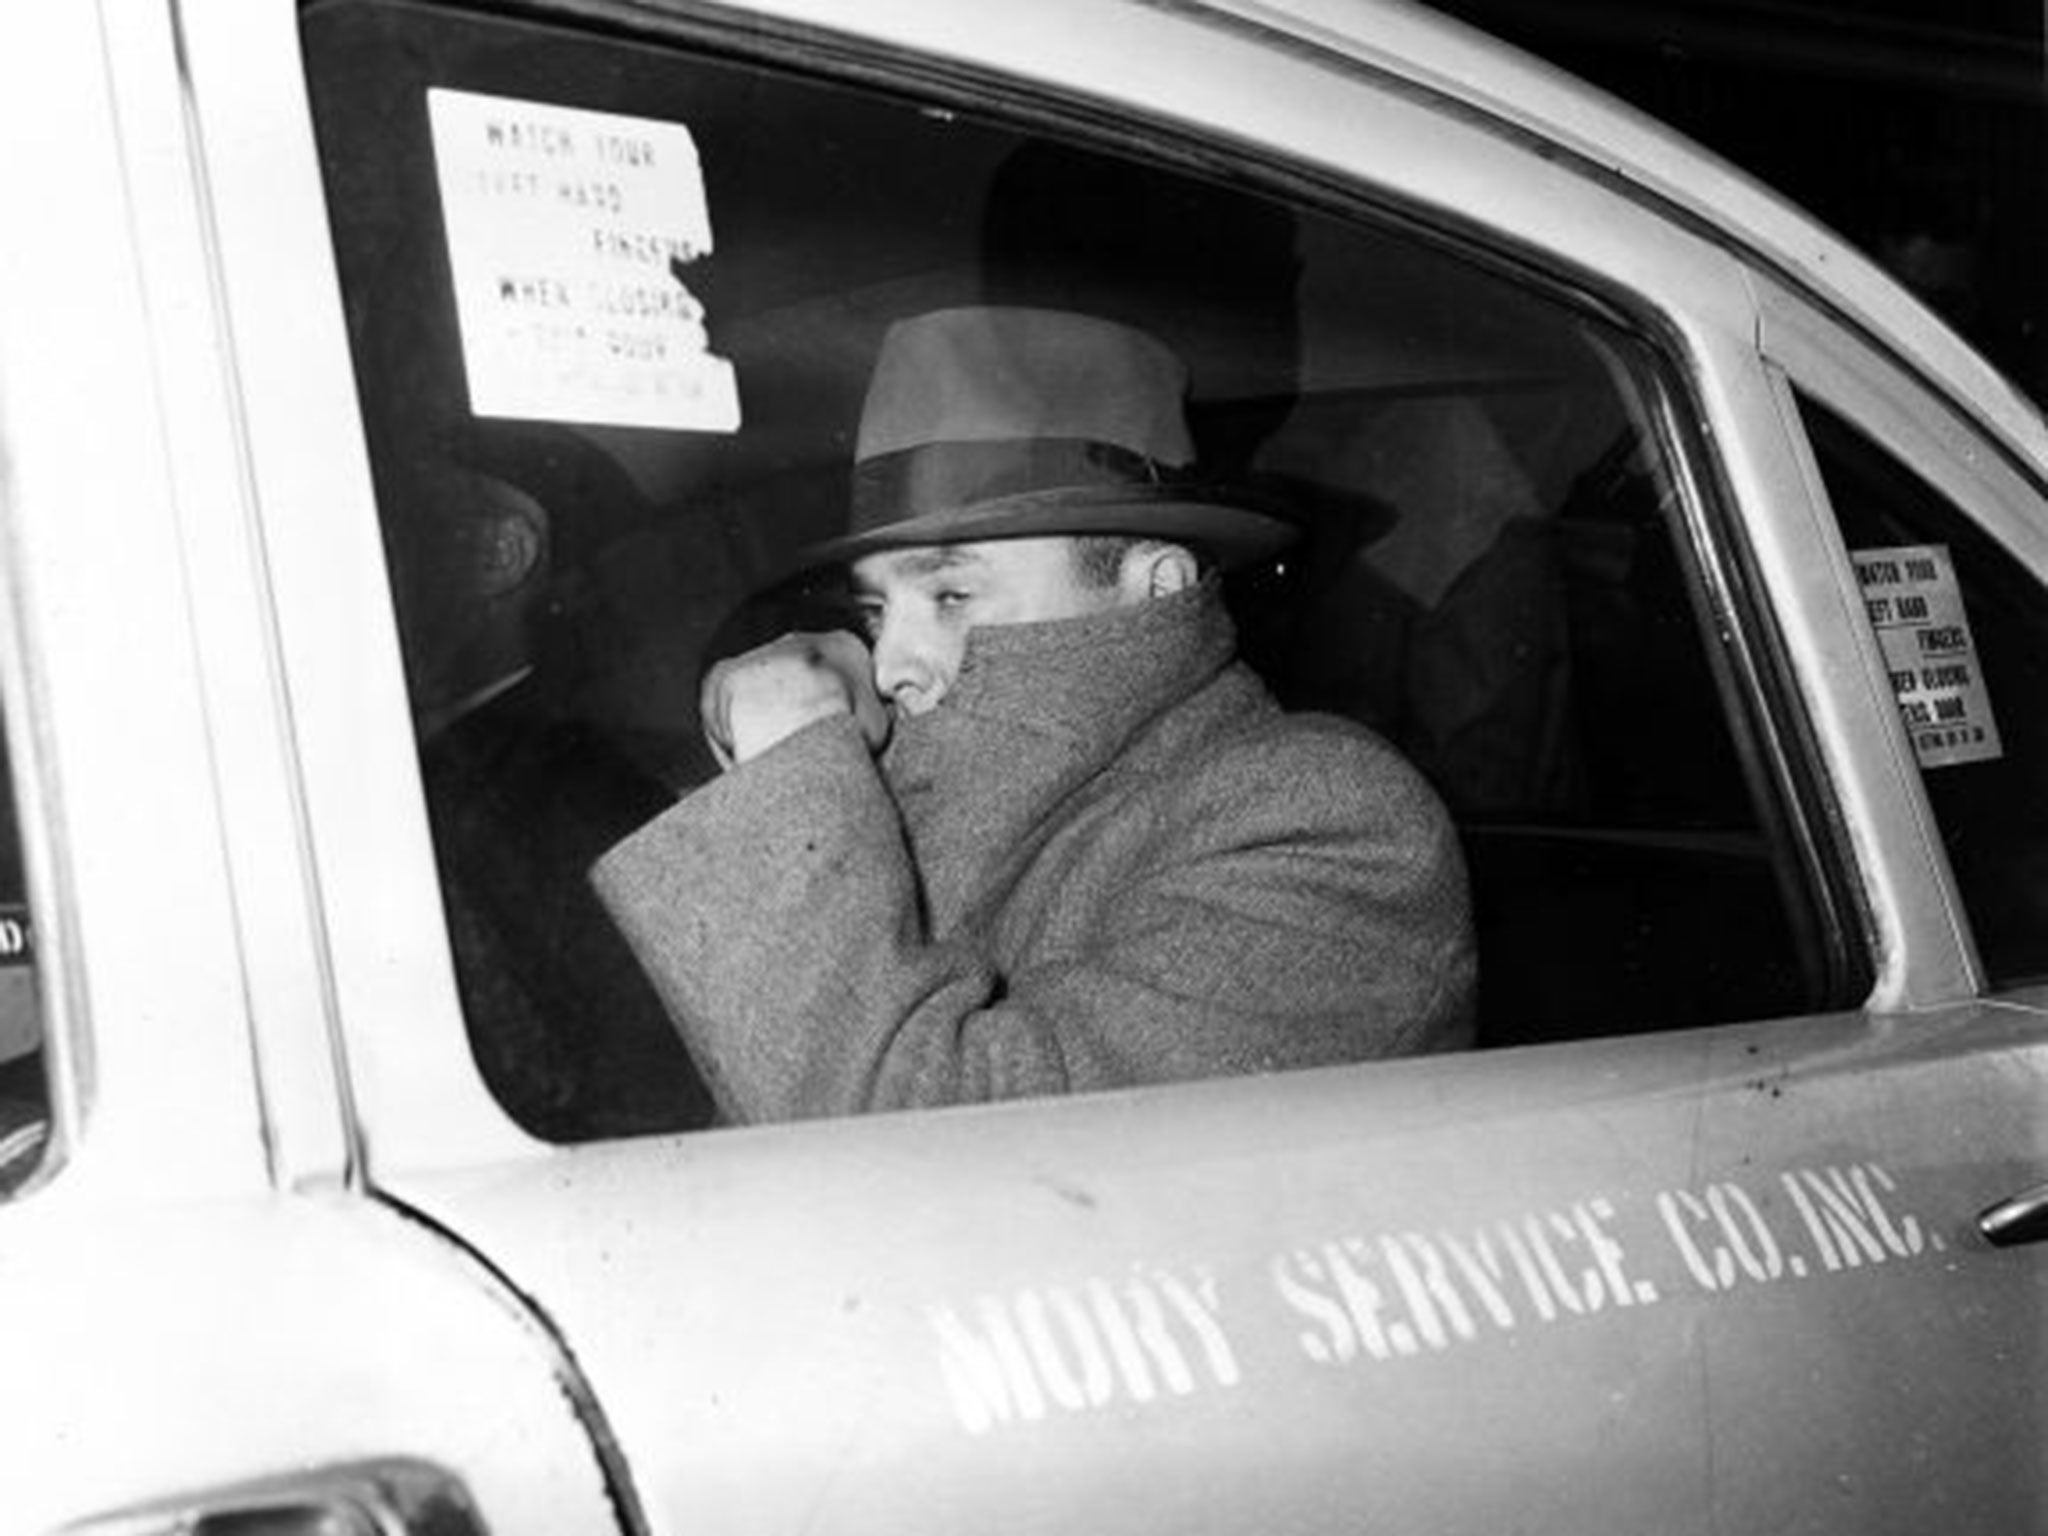 Greenglass leaves prison in 1960; he had served 10 years of a 15-year sentence